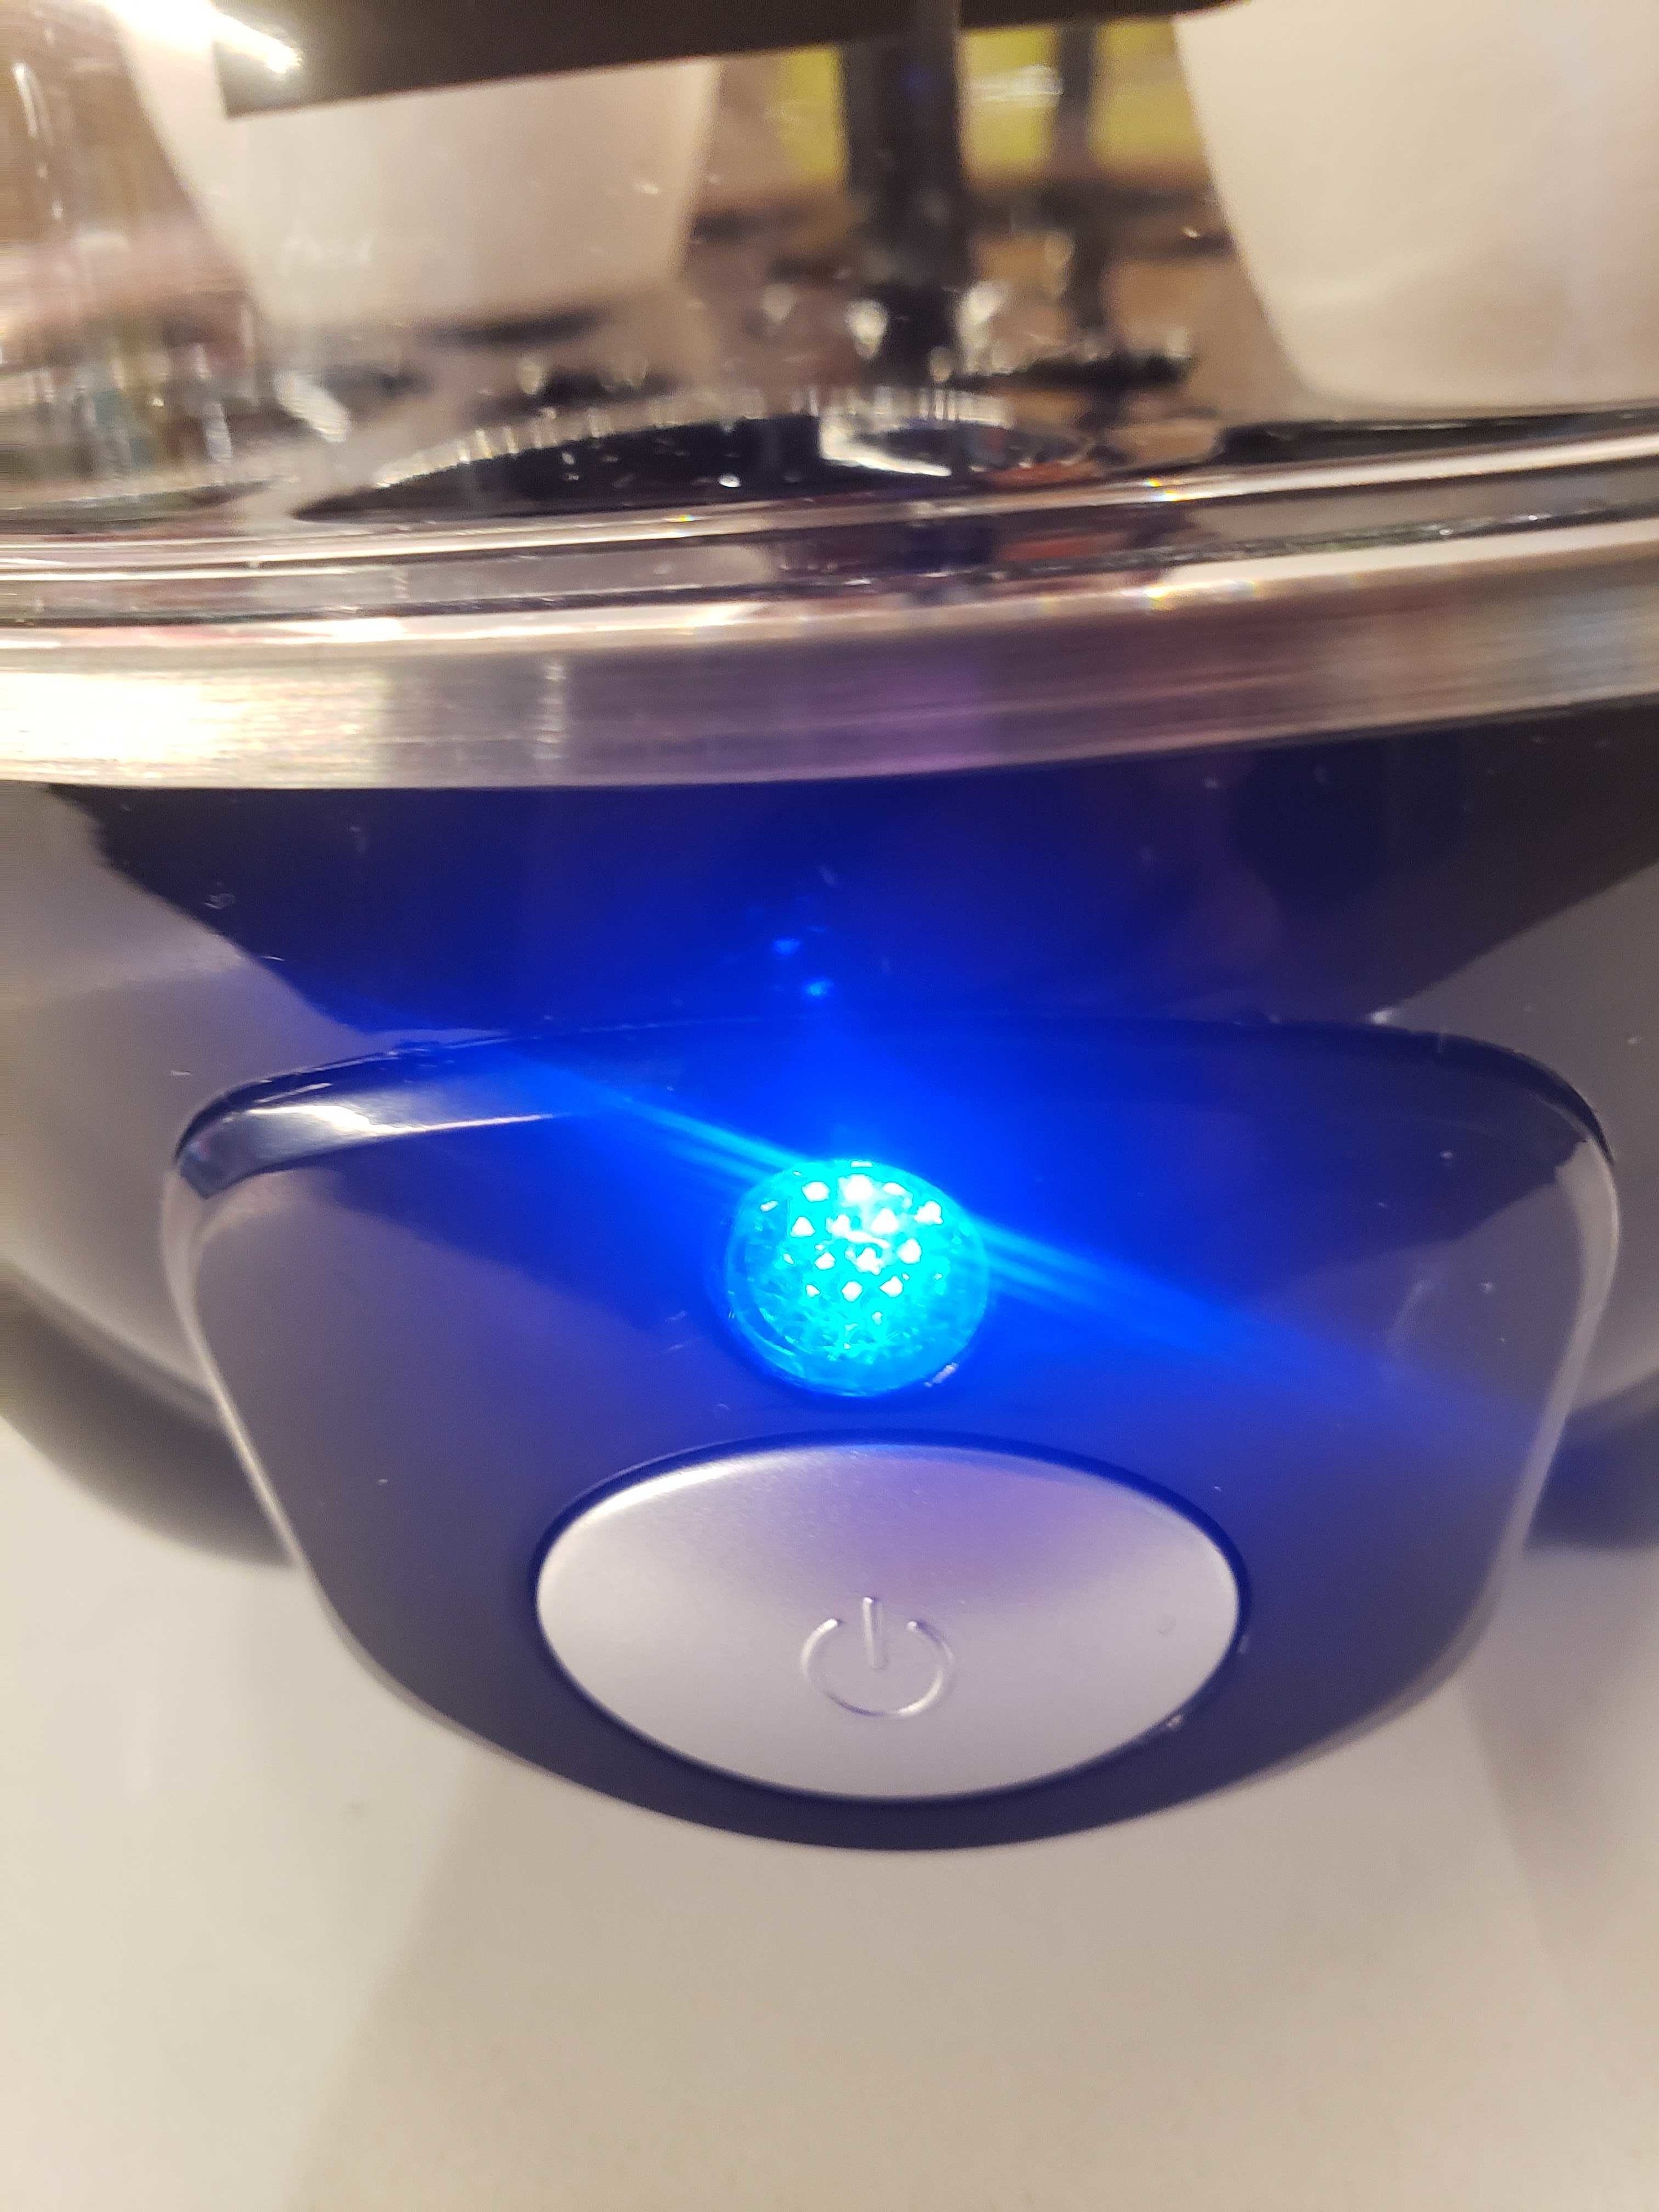 I Try 's Top-Rated Egg Cooker, Dash Rapid Egg Cooker:   By Tasty